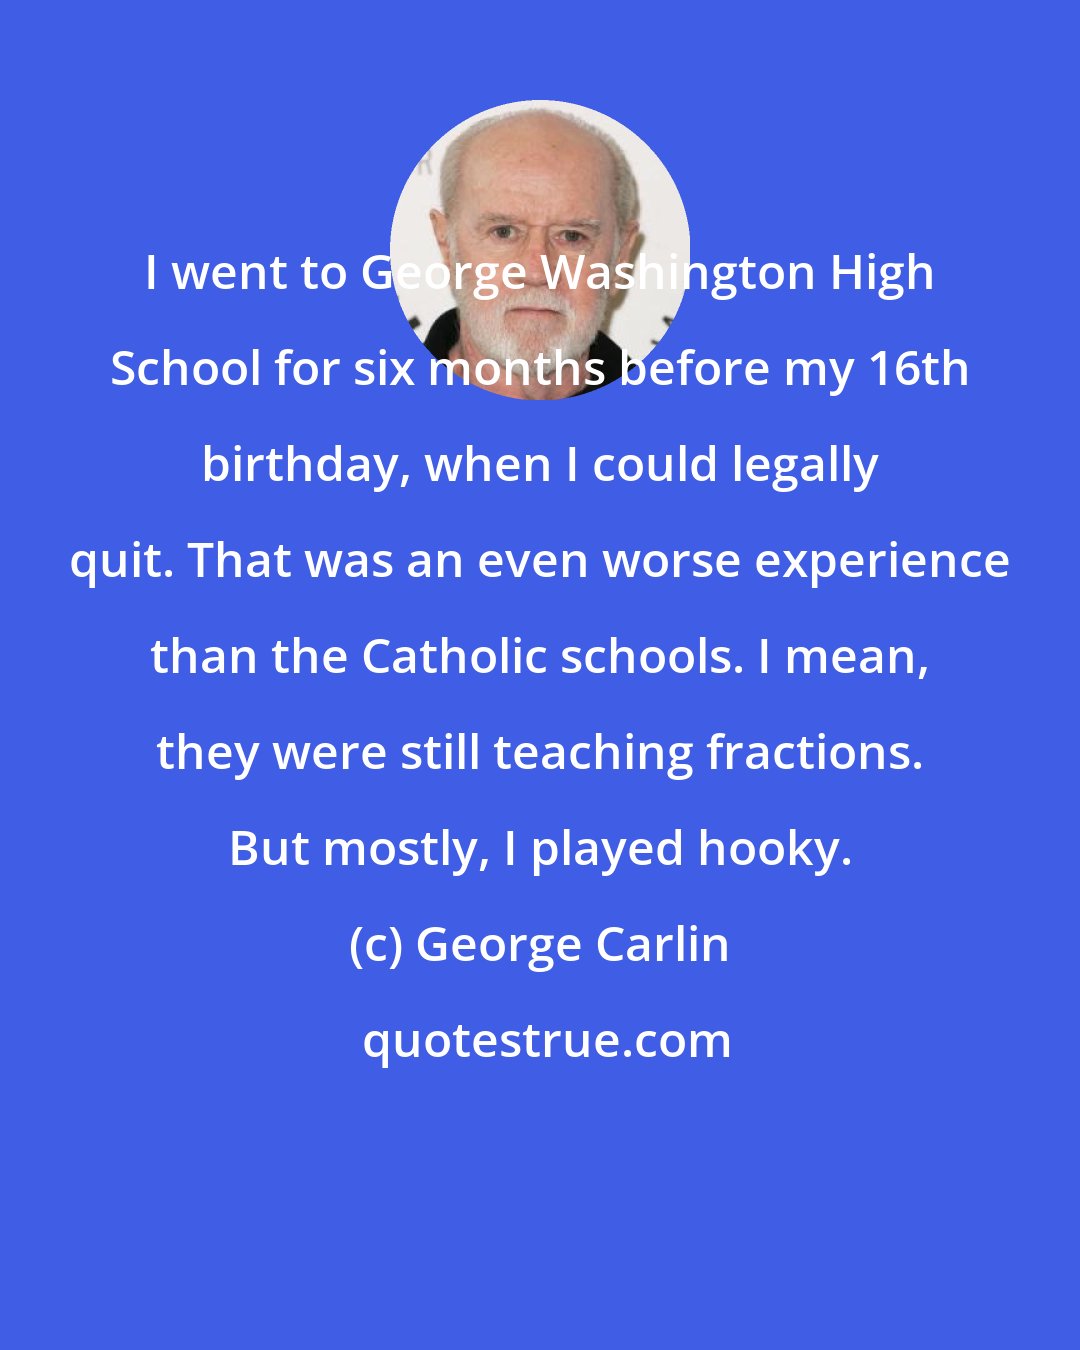 George Carlin: I went to George Washington High School for six months before my 16th birthday, when I could legally quit. That was an even worse experience than the Catholic schools. I mean, they were still teaching fractions. But mostly, I played hooky.